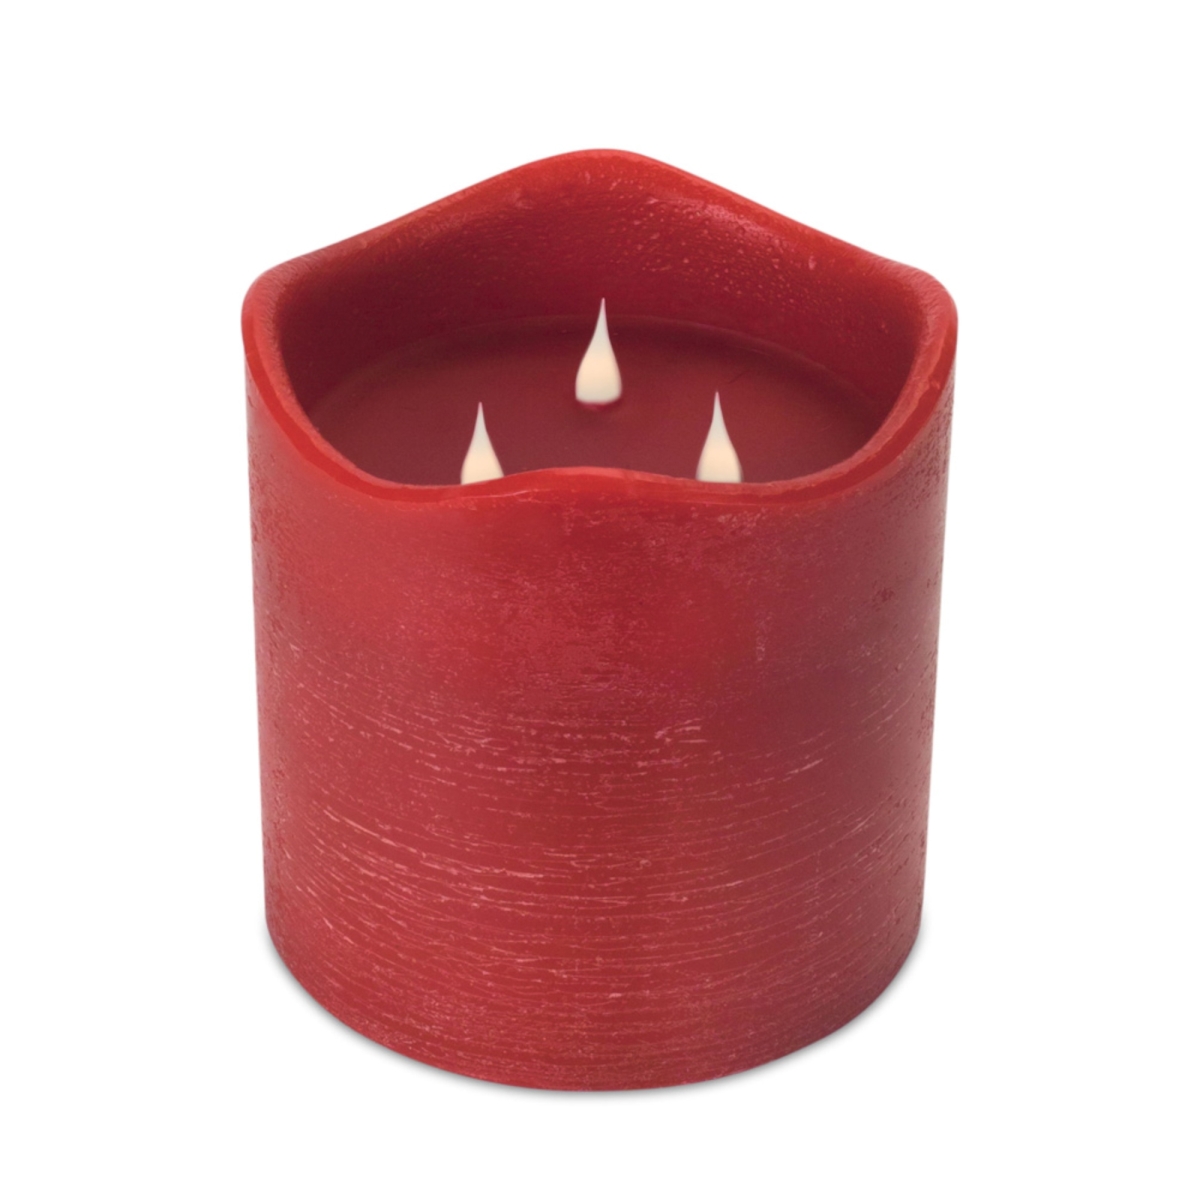 Candle 6"D x 6"H Wax/Plastic